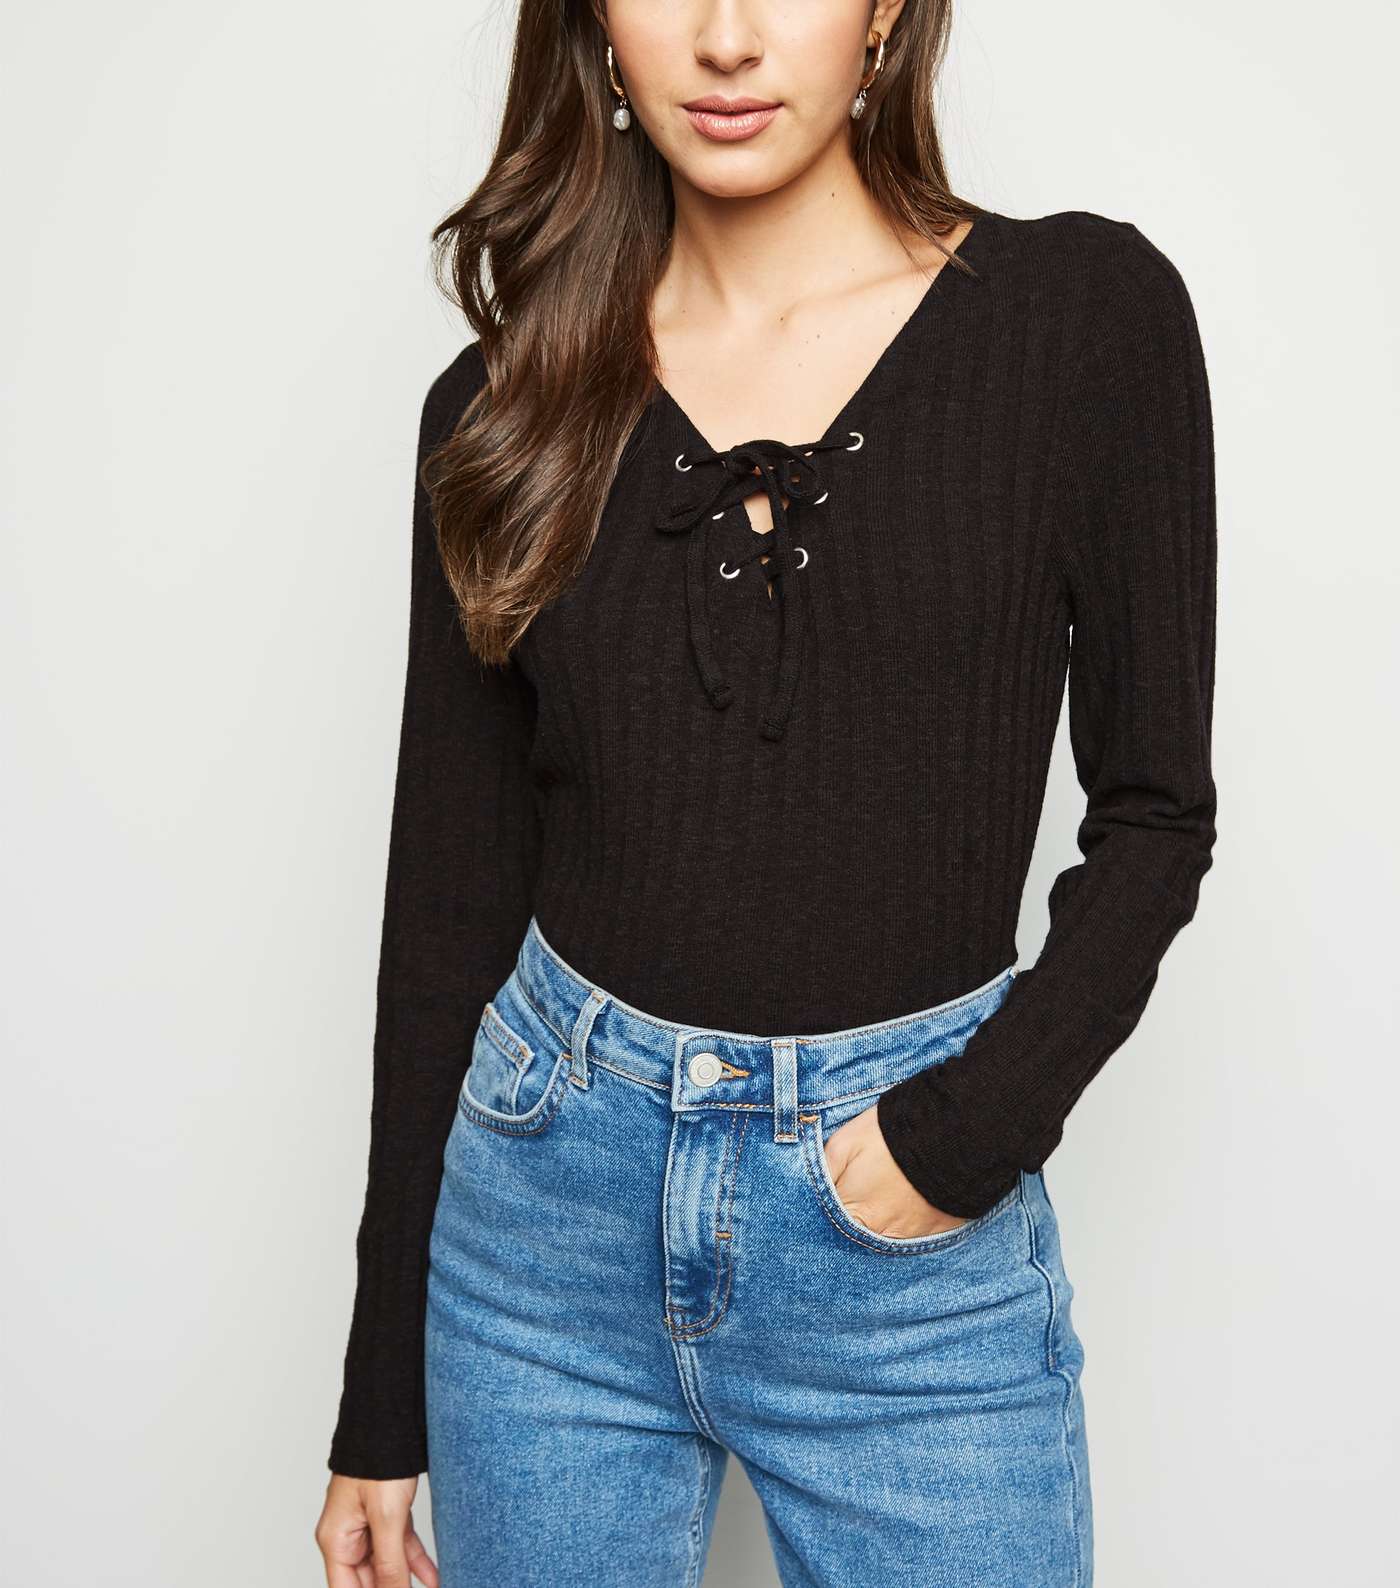 Black Ribbed Lace Up Top